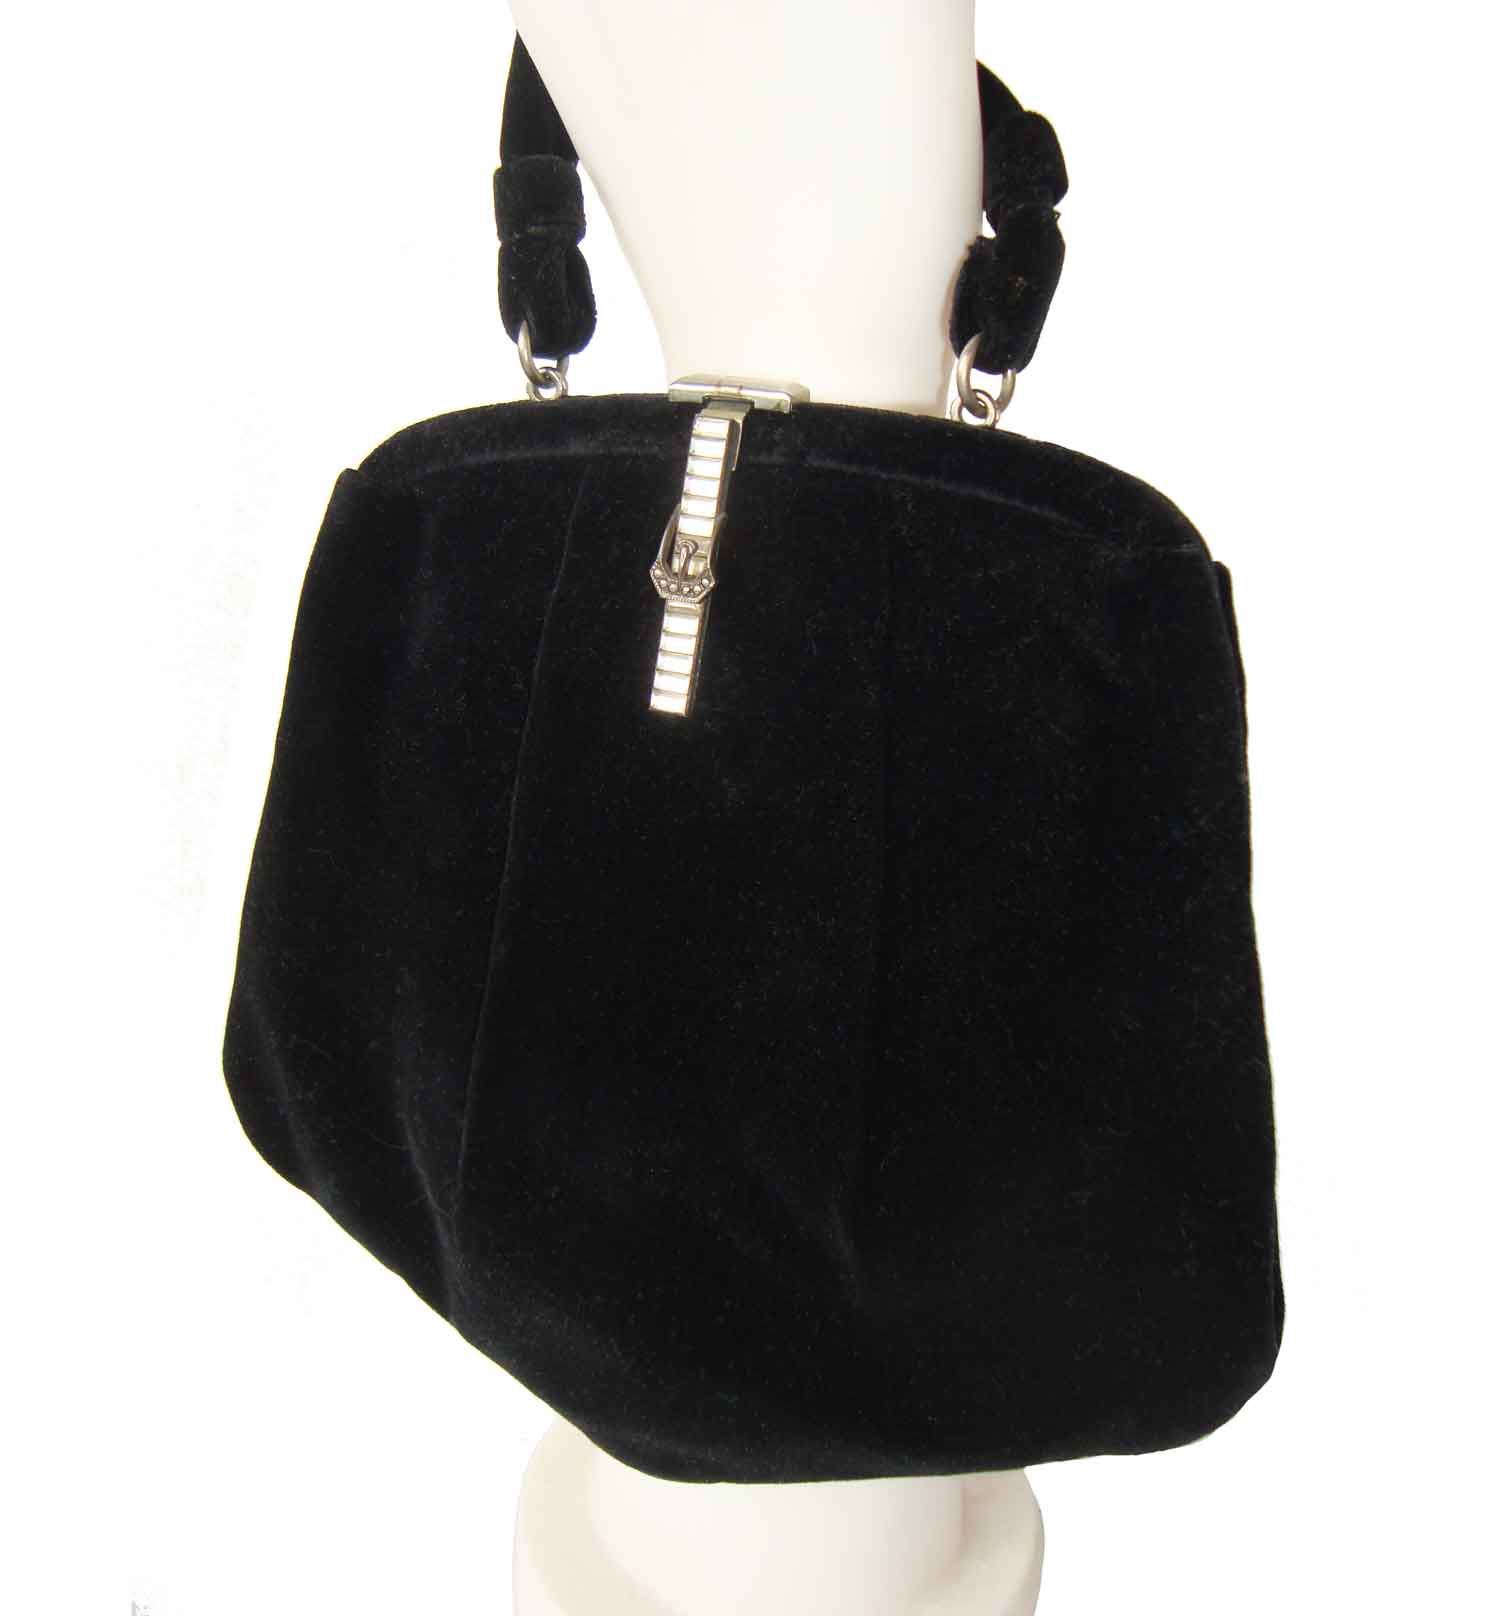 Vintage 30s Black Velvet Cocktail Bag & Coin Purse with Rhinestone Novelty Clasp